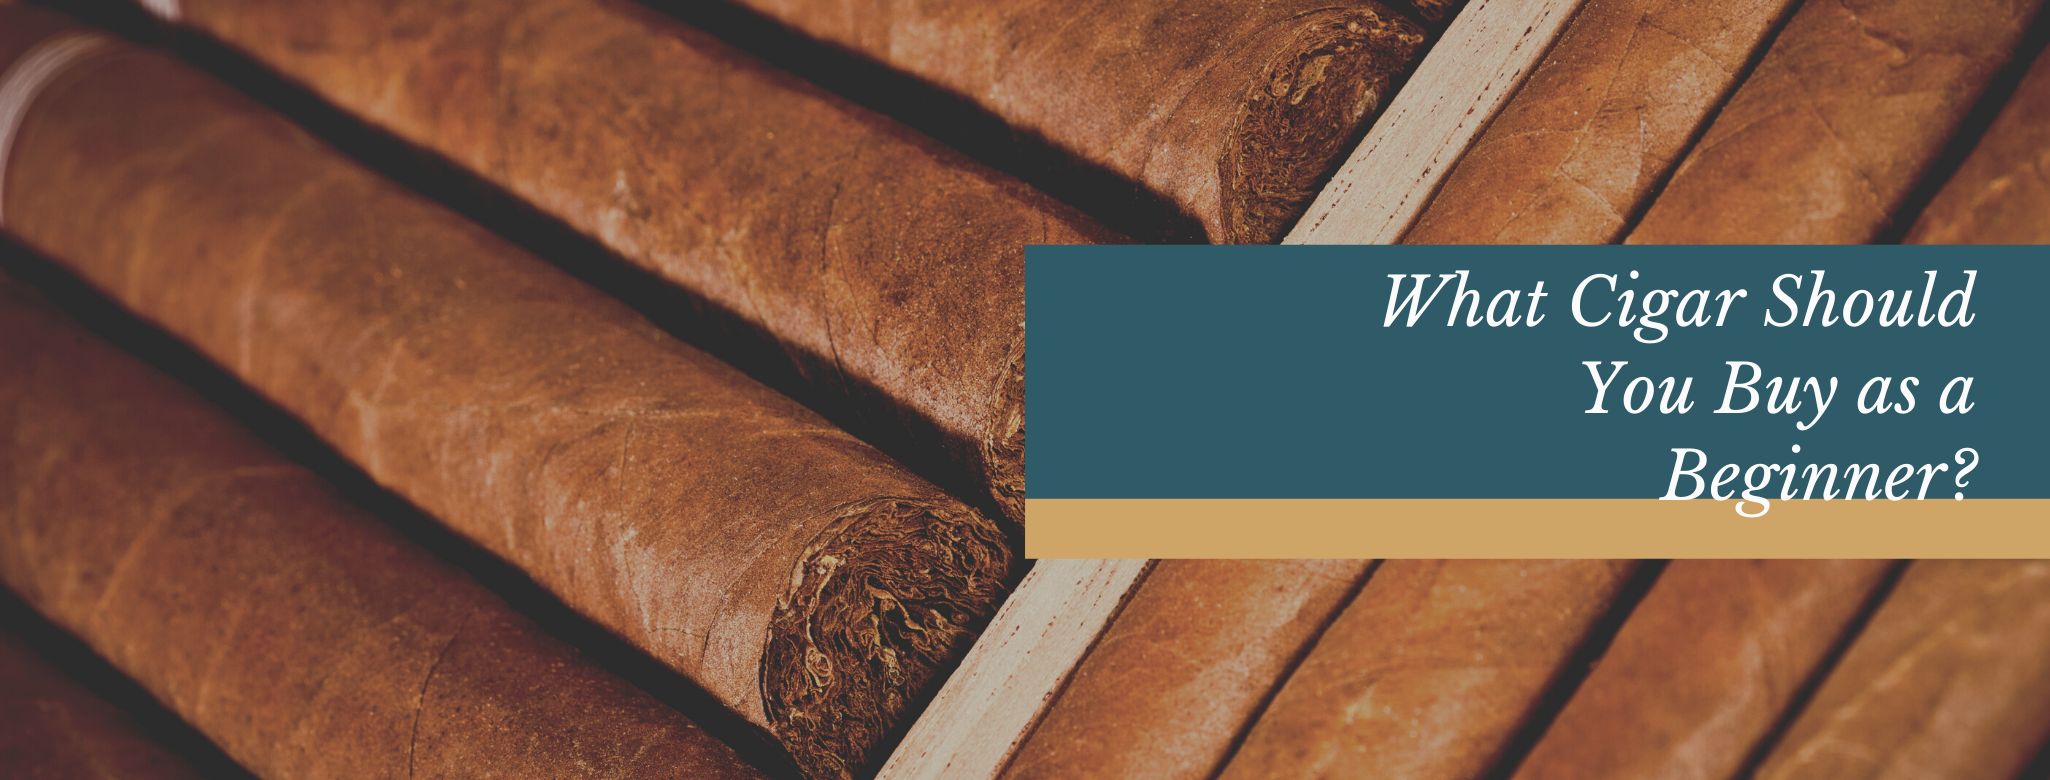 Reads: What Cigar Should You Buy as  a Beginner?